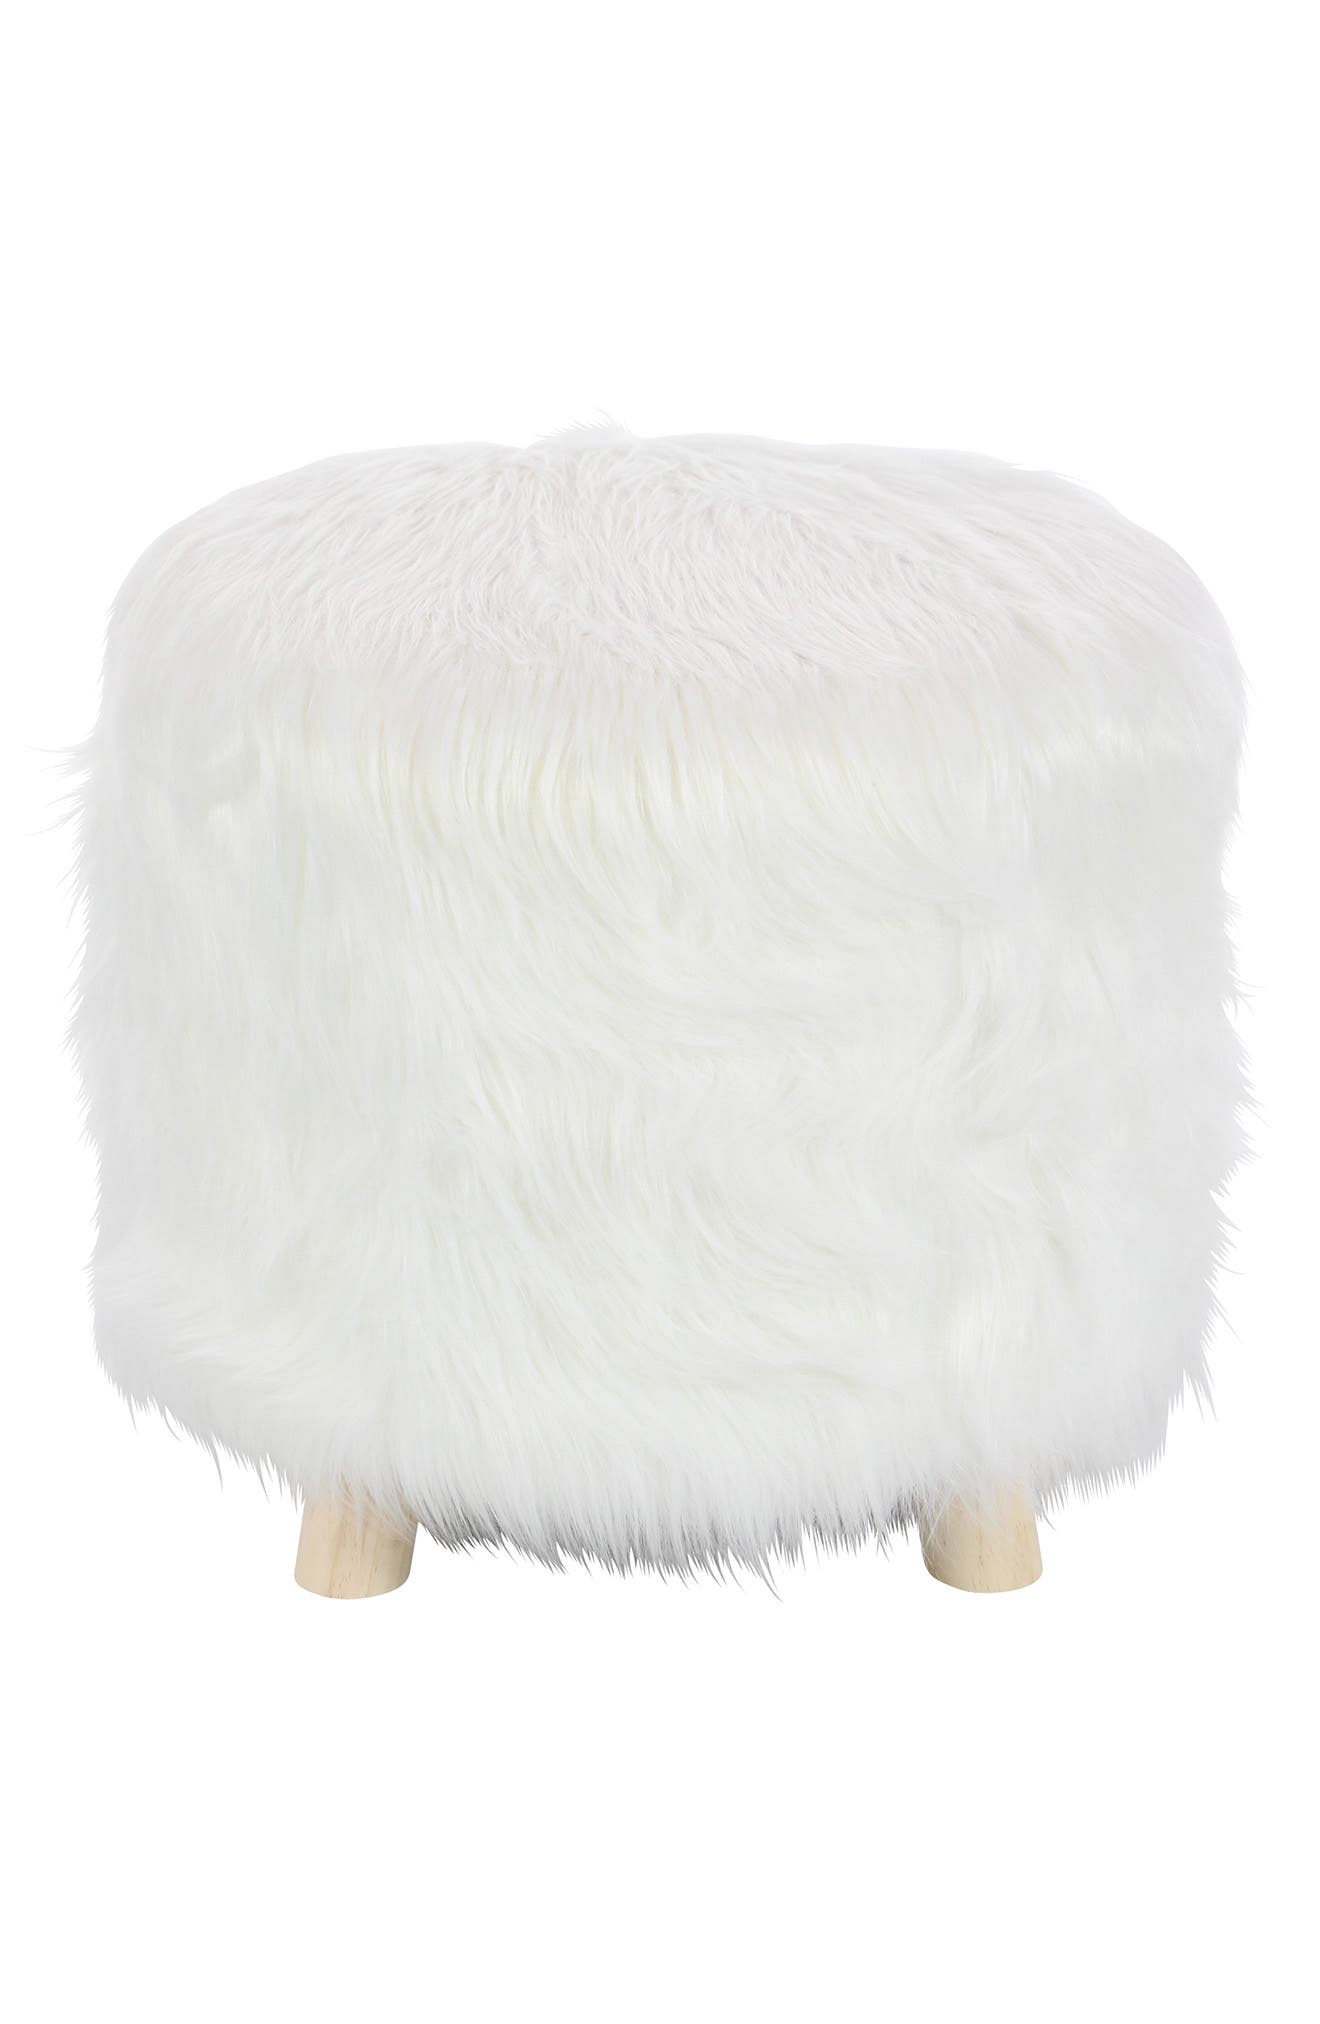 Willow Row Brown/white Faux Fur Footstool